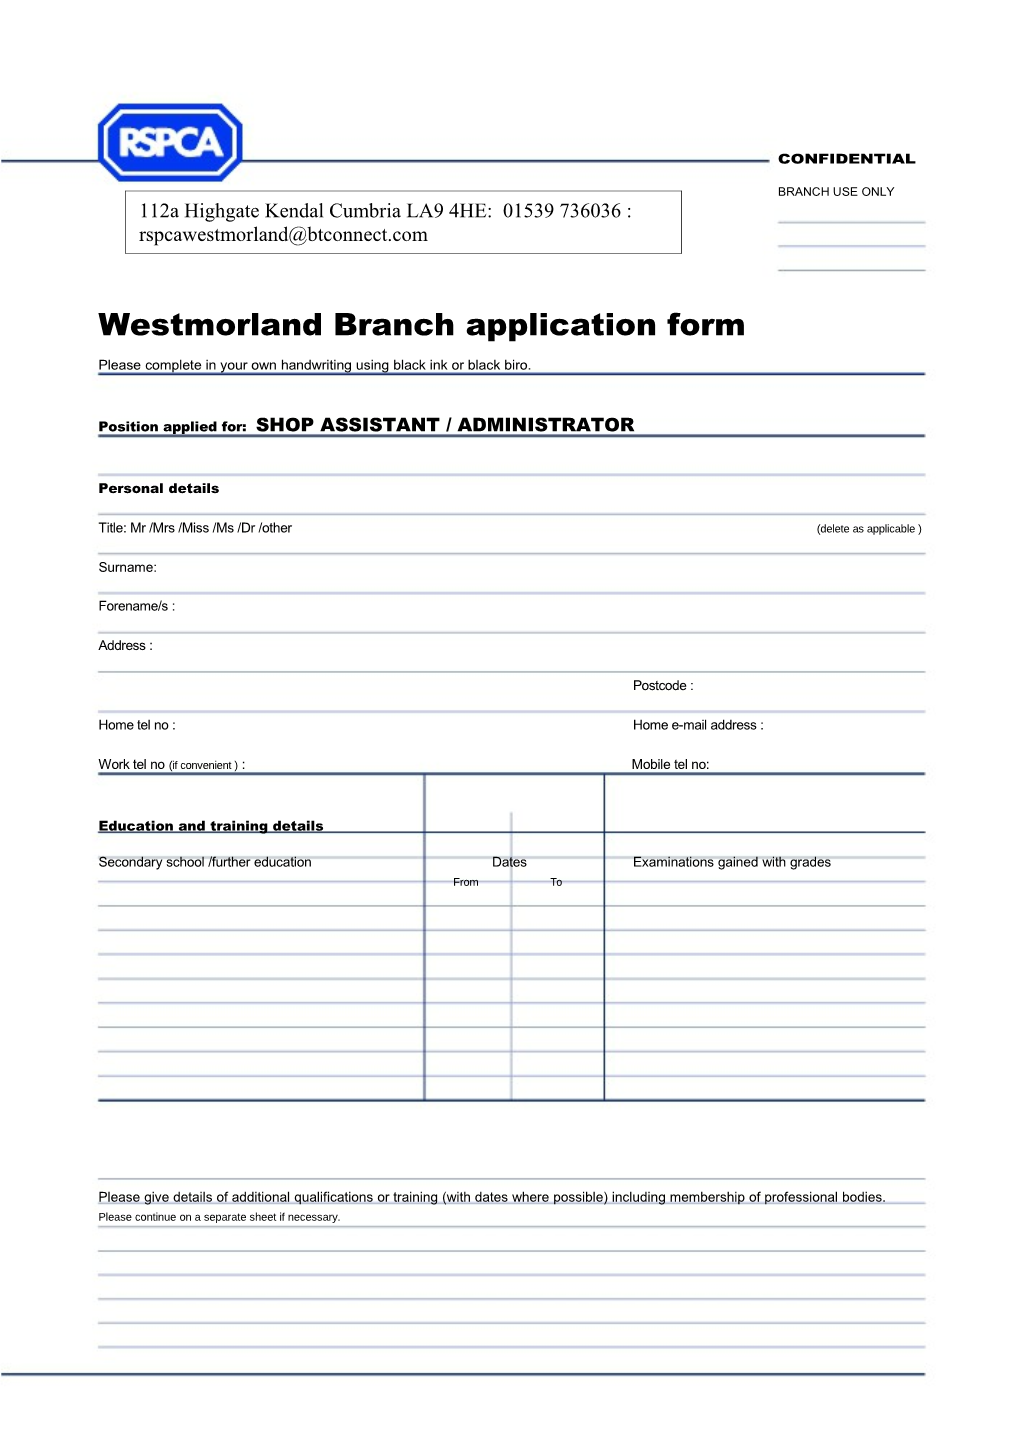 Westmorland Branch Application Form